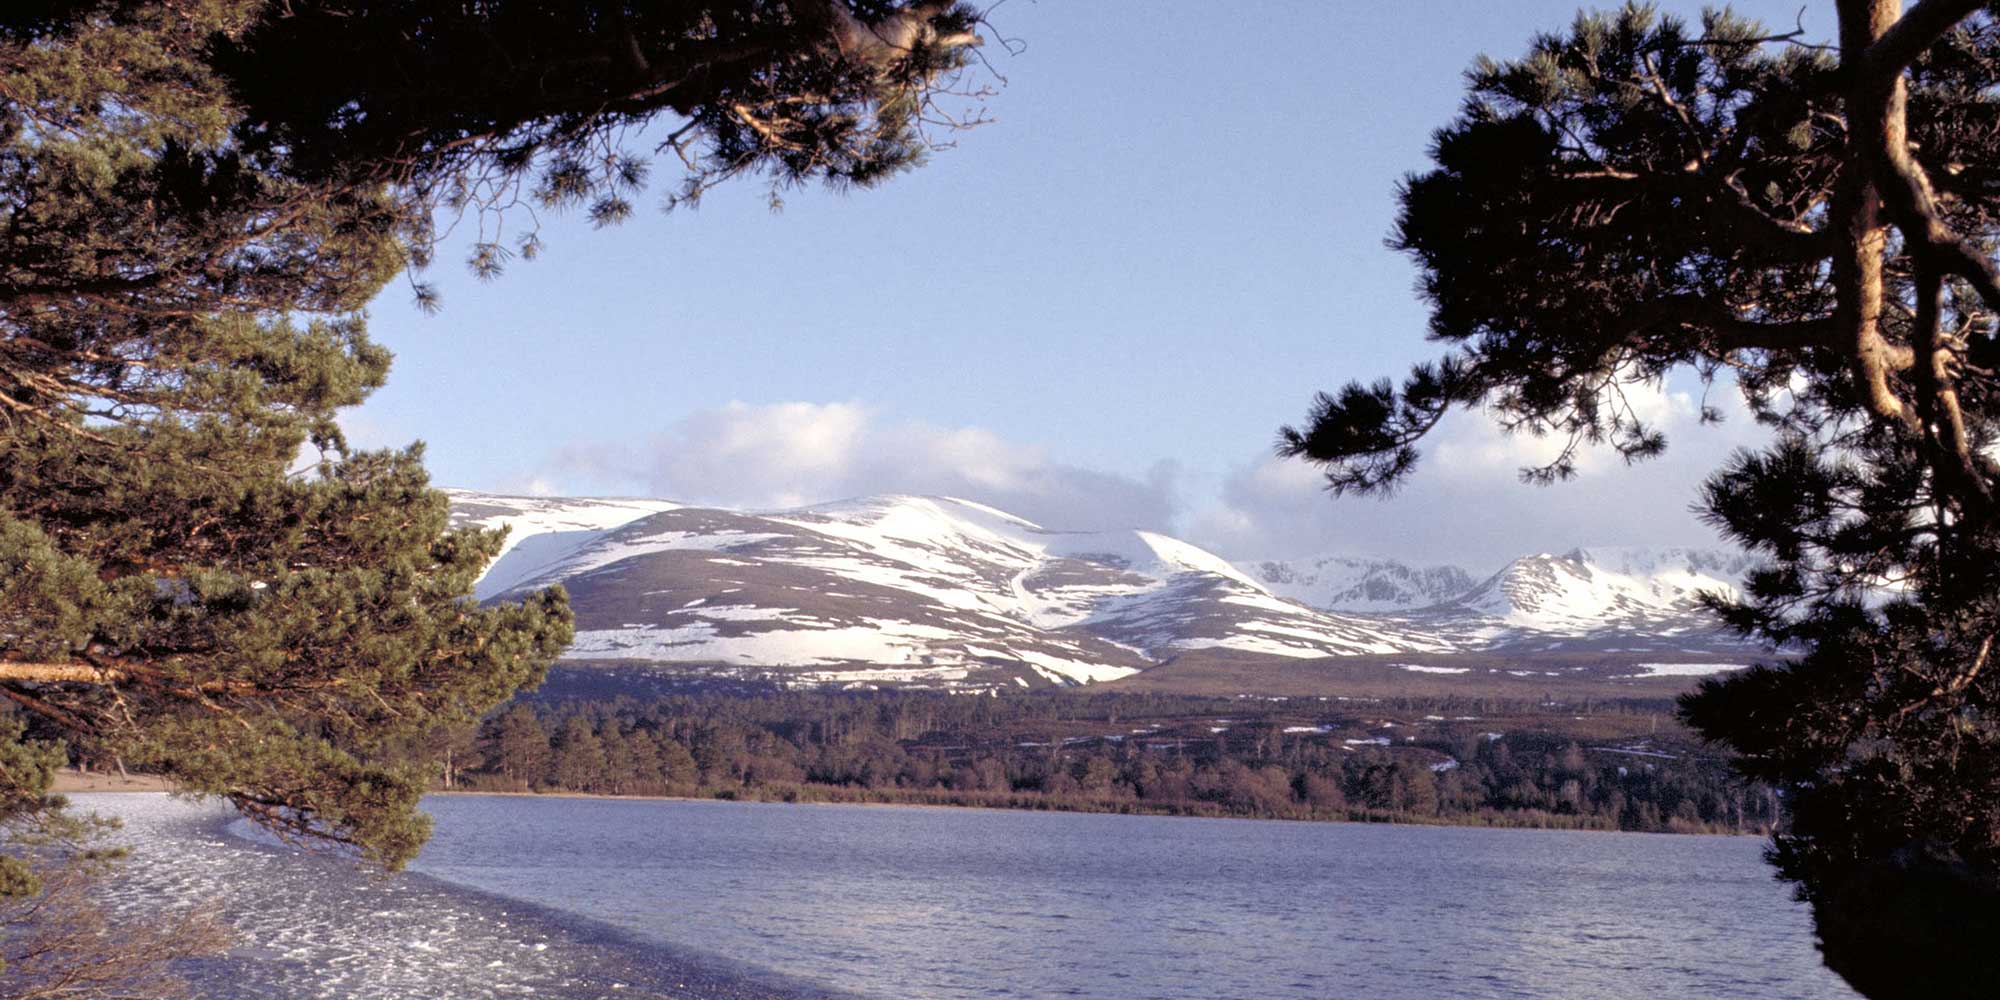 A shingle loch beach lined with pine trees with snow topped mountains on the far shore